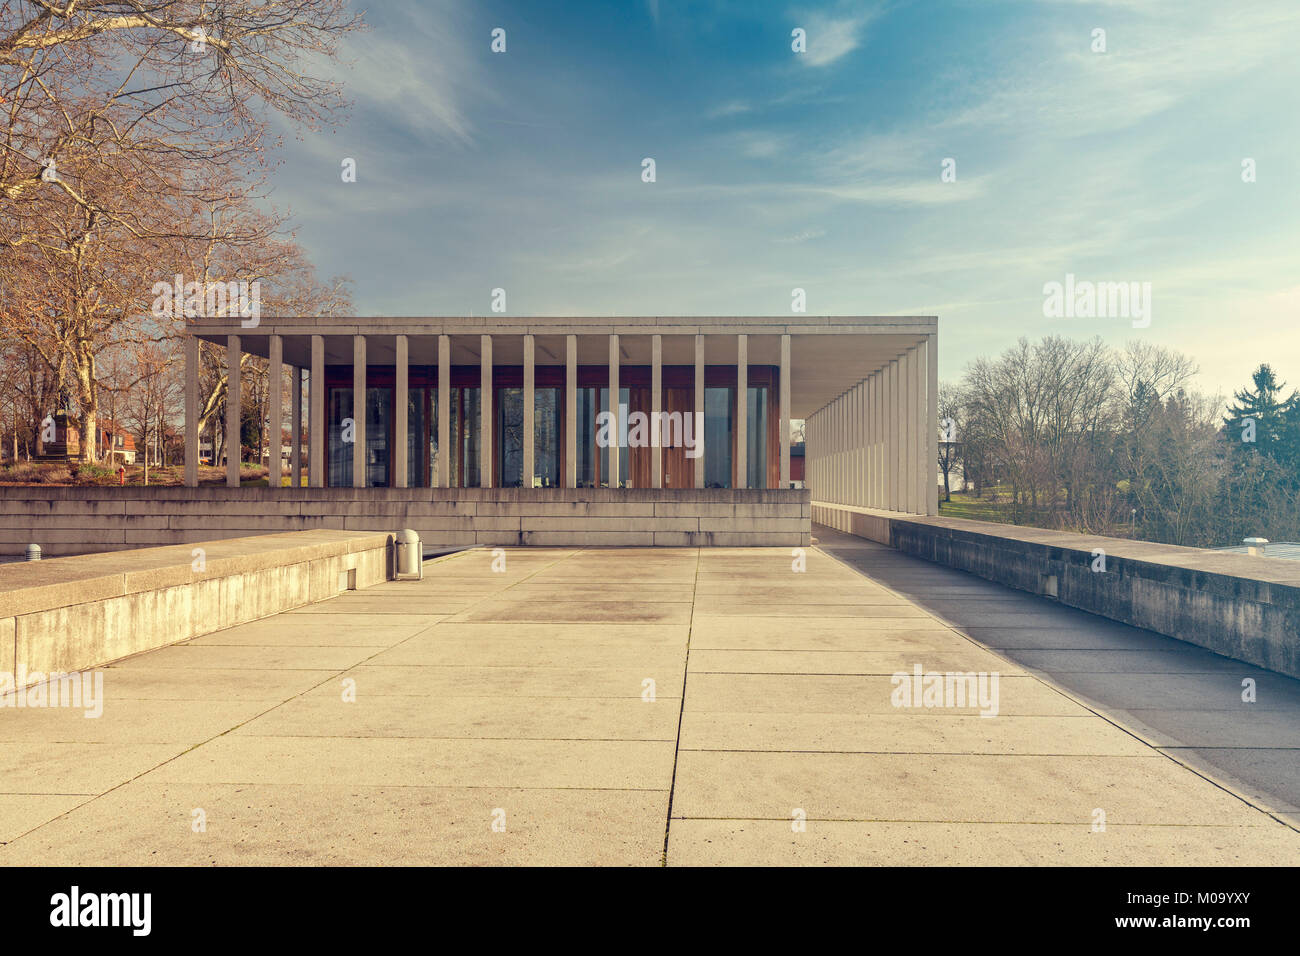 The museum of literature in Marbach, Germany. Stock Photo